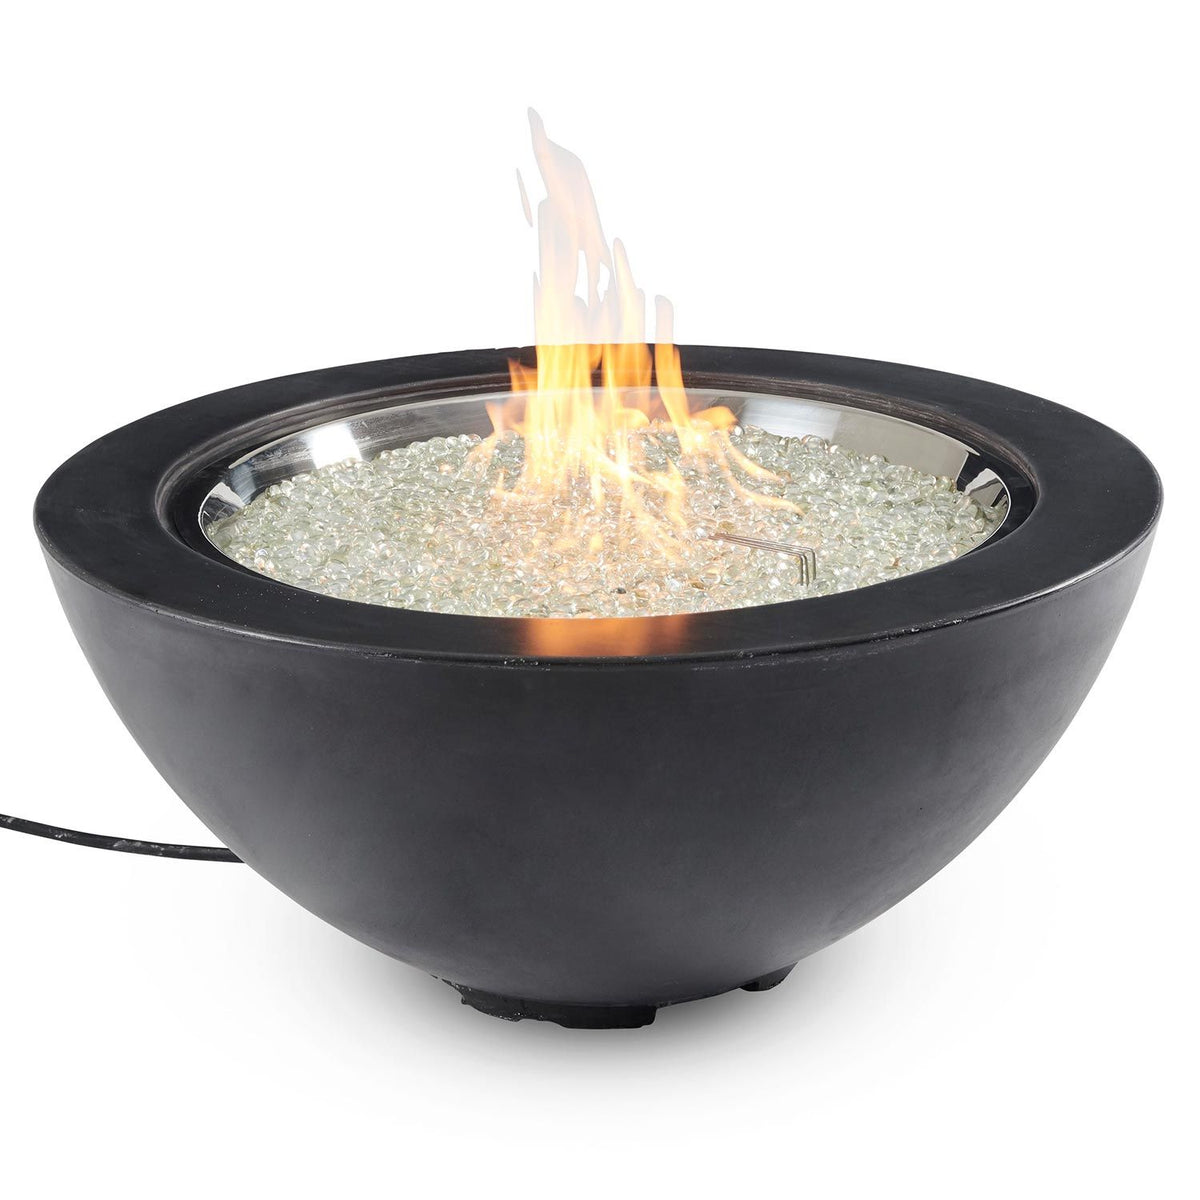 The Outdoor Greatroom White Cove 30 Fire Bowl